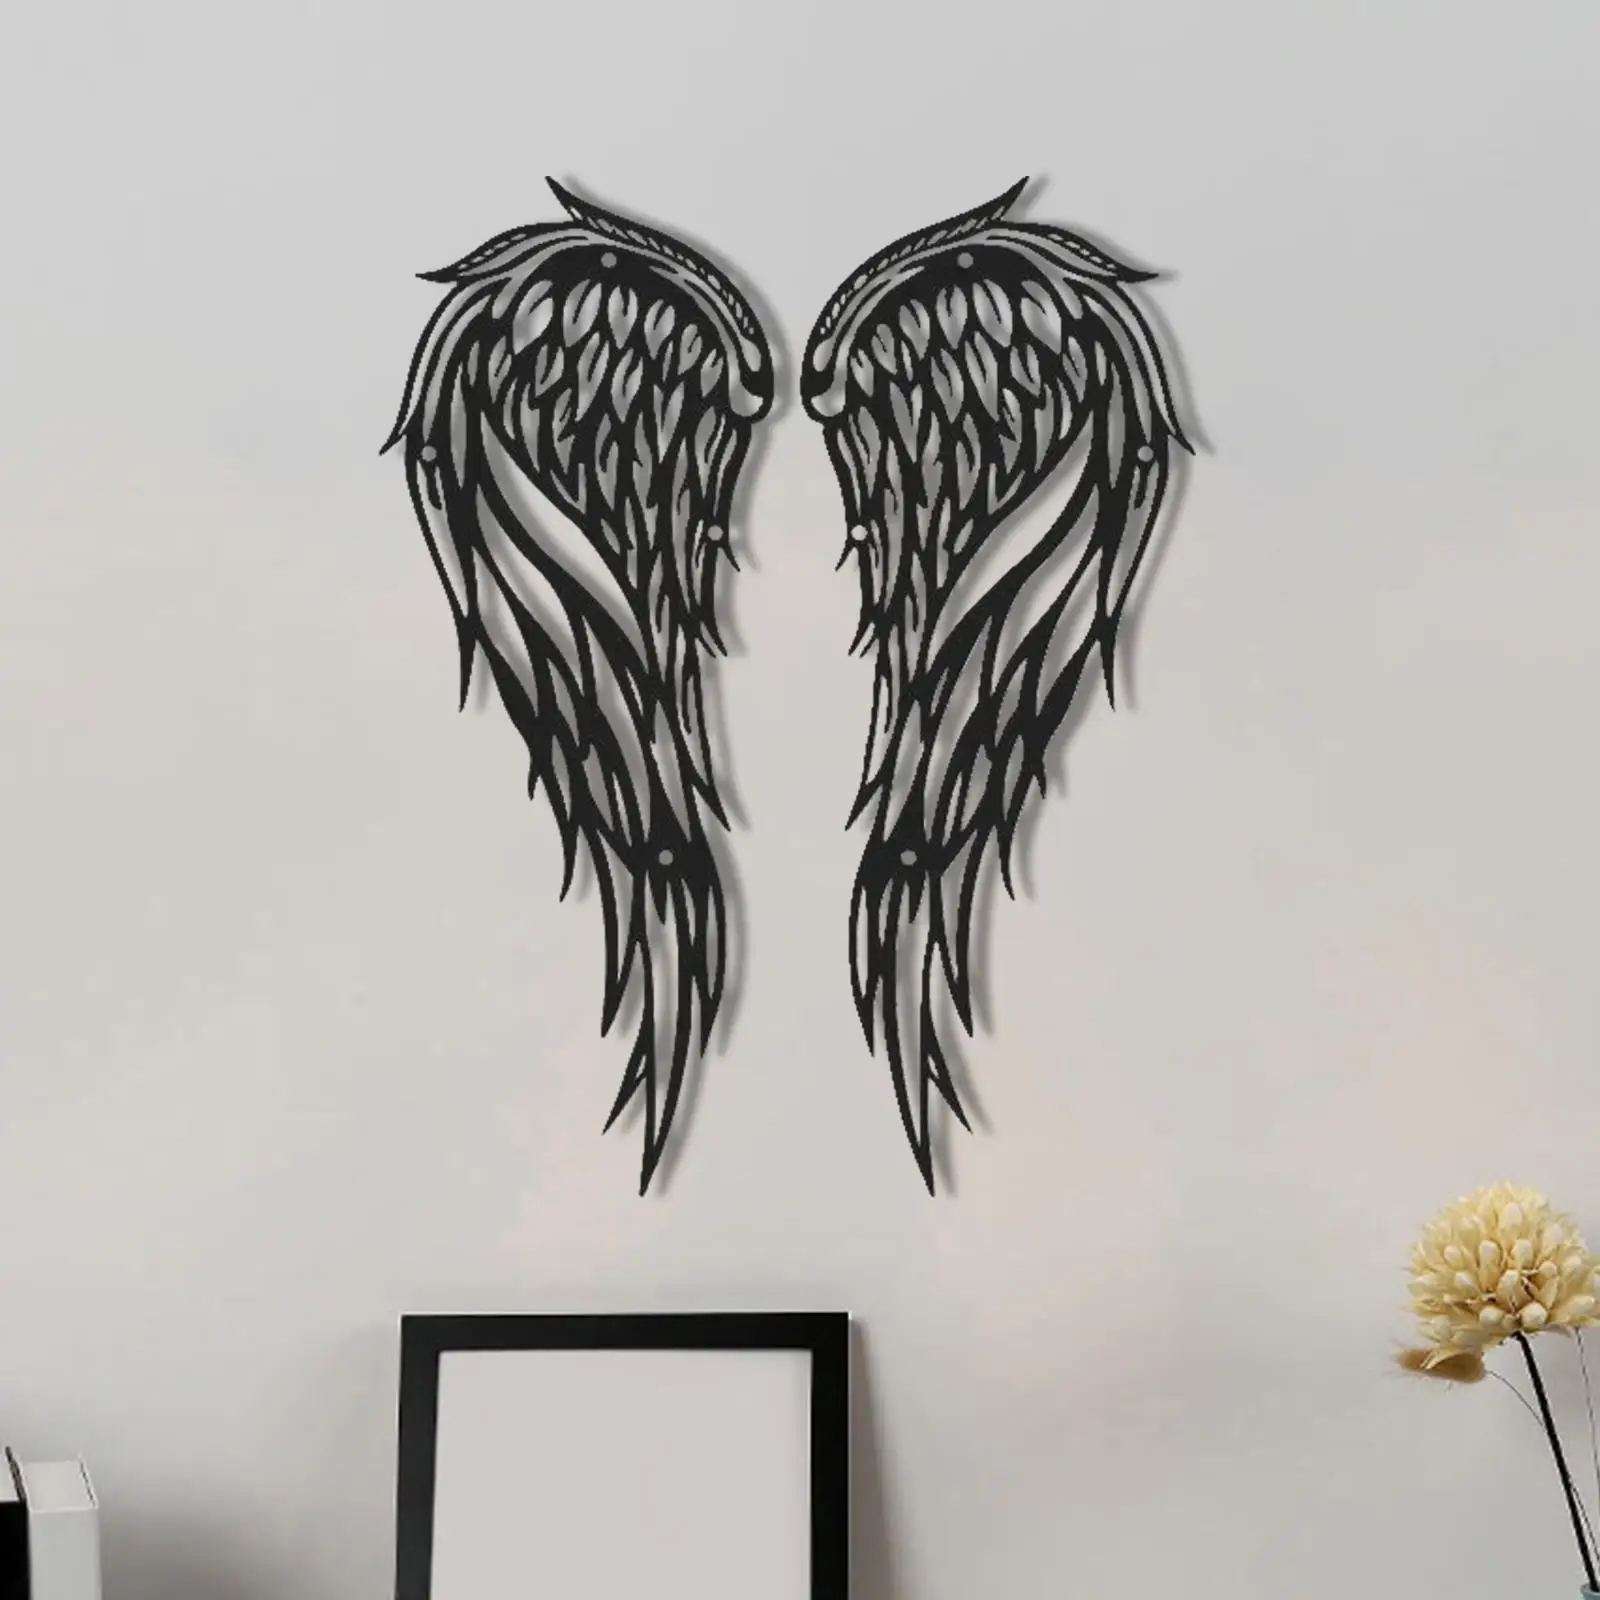 Rustic Pair of Angel Wing Crafts Retro Style Decorative Engraved Metal Wall Art Sculpture for Statue Indoor Outdoor Living Room